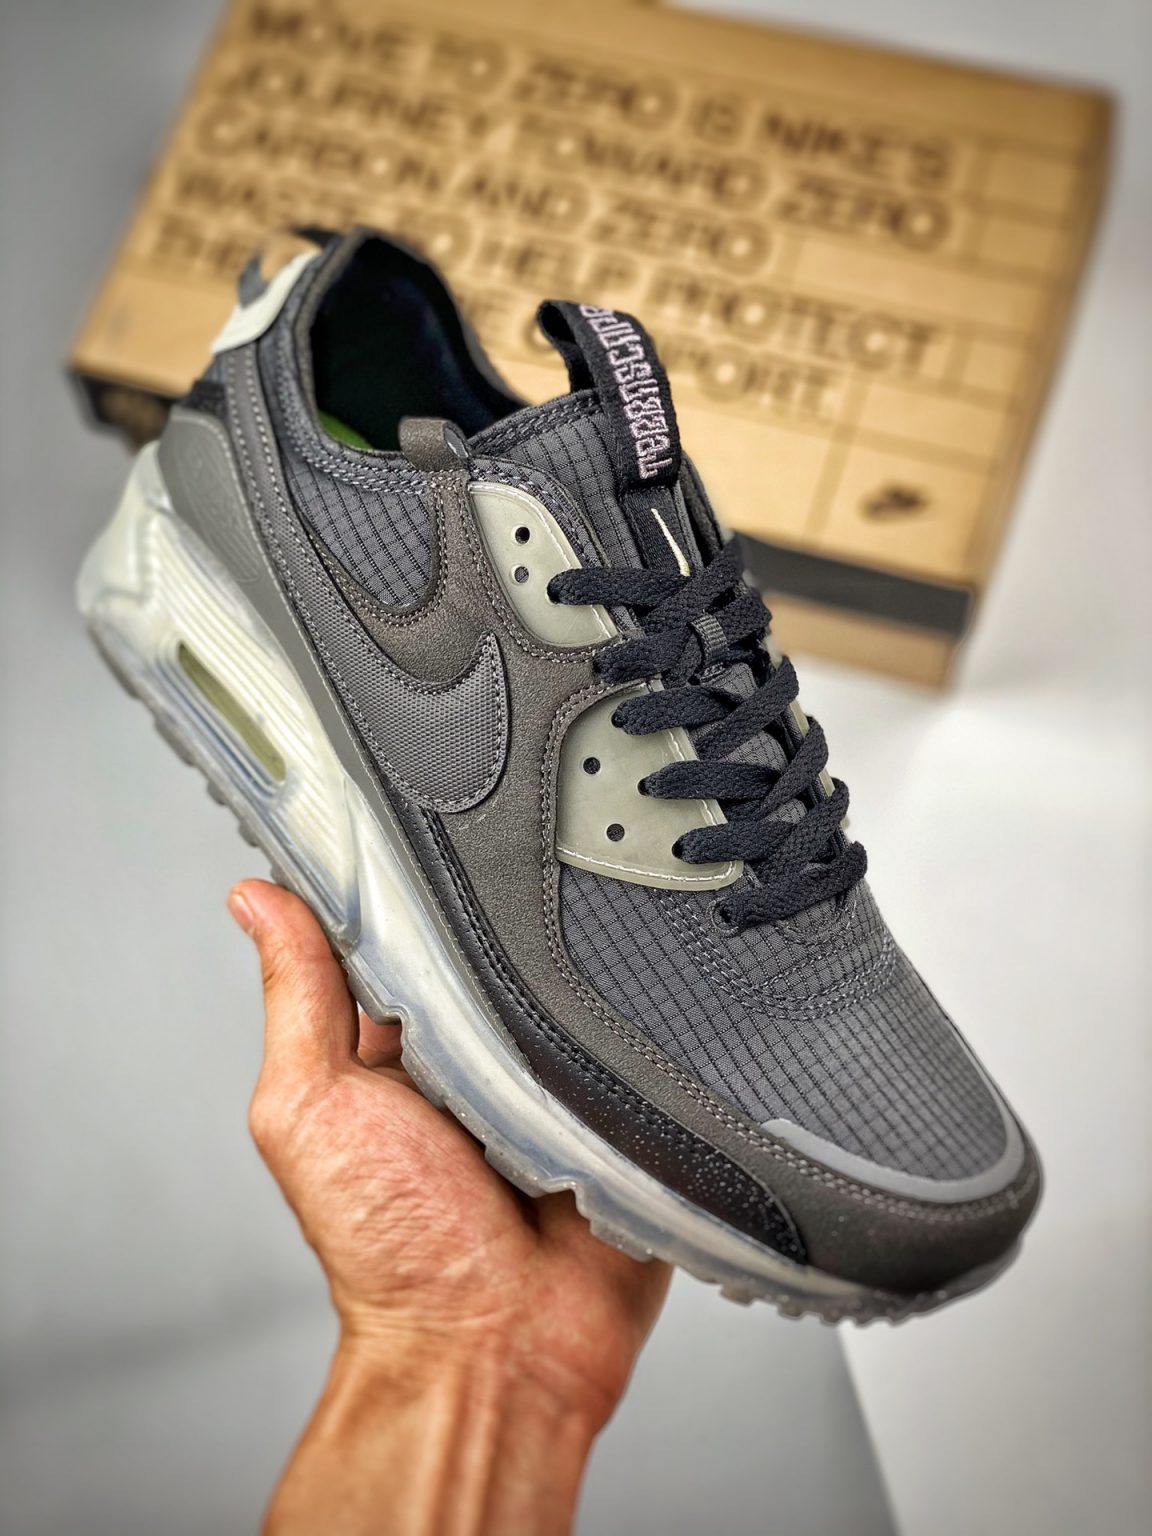 Nike Air Max 90 Terrascape Black/Dark Grey-Lime Ice-Anthracite DH2973 ...